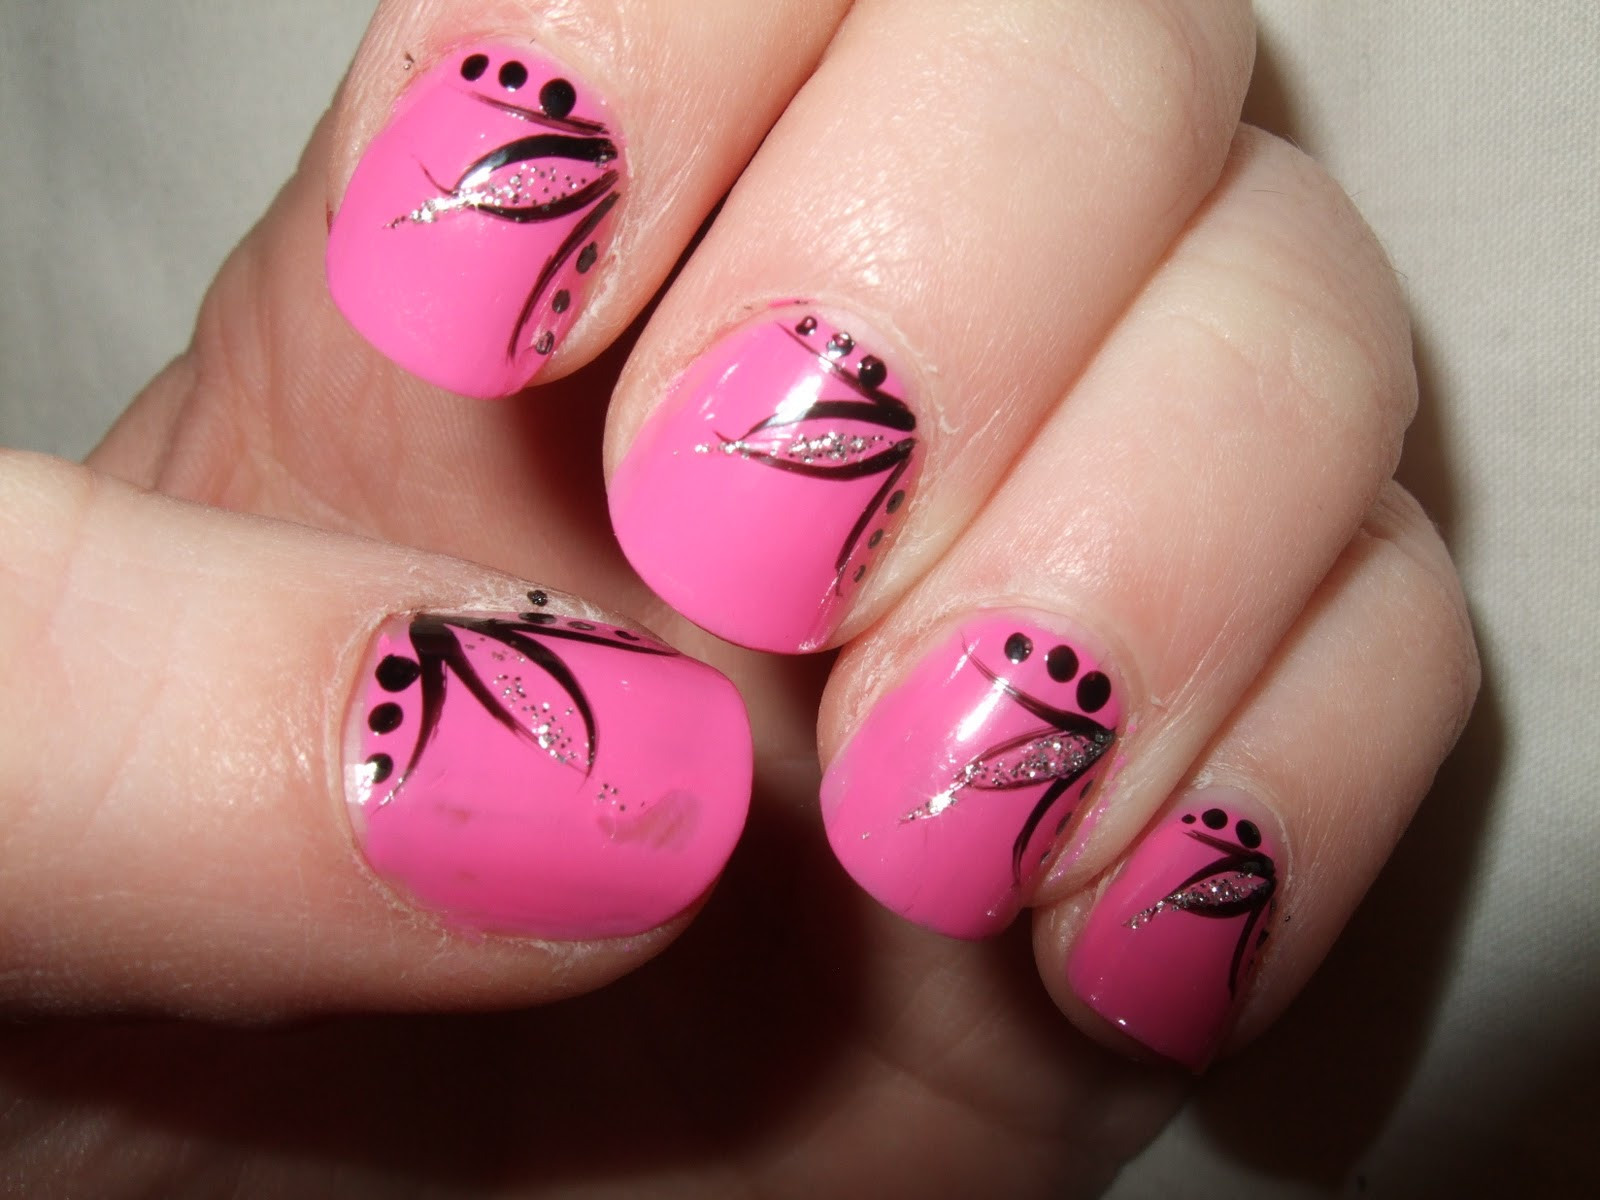 Simple Nail Design Ideas
 33 Nail Art Designs to Inspire You – The WoW Style